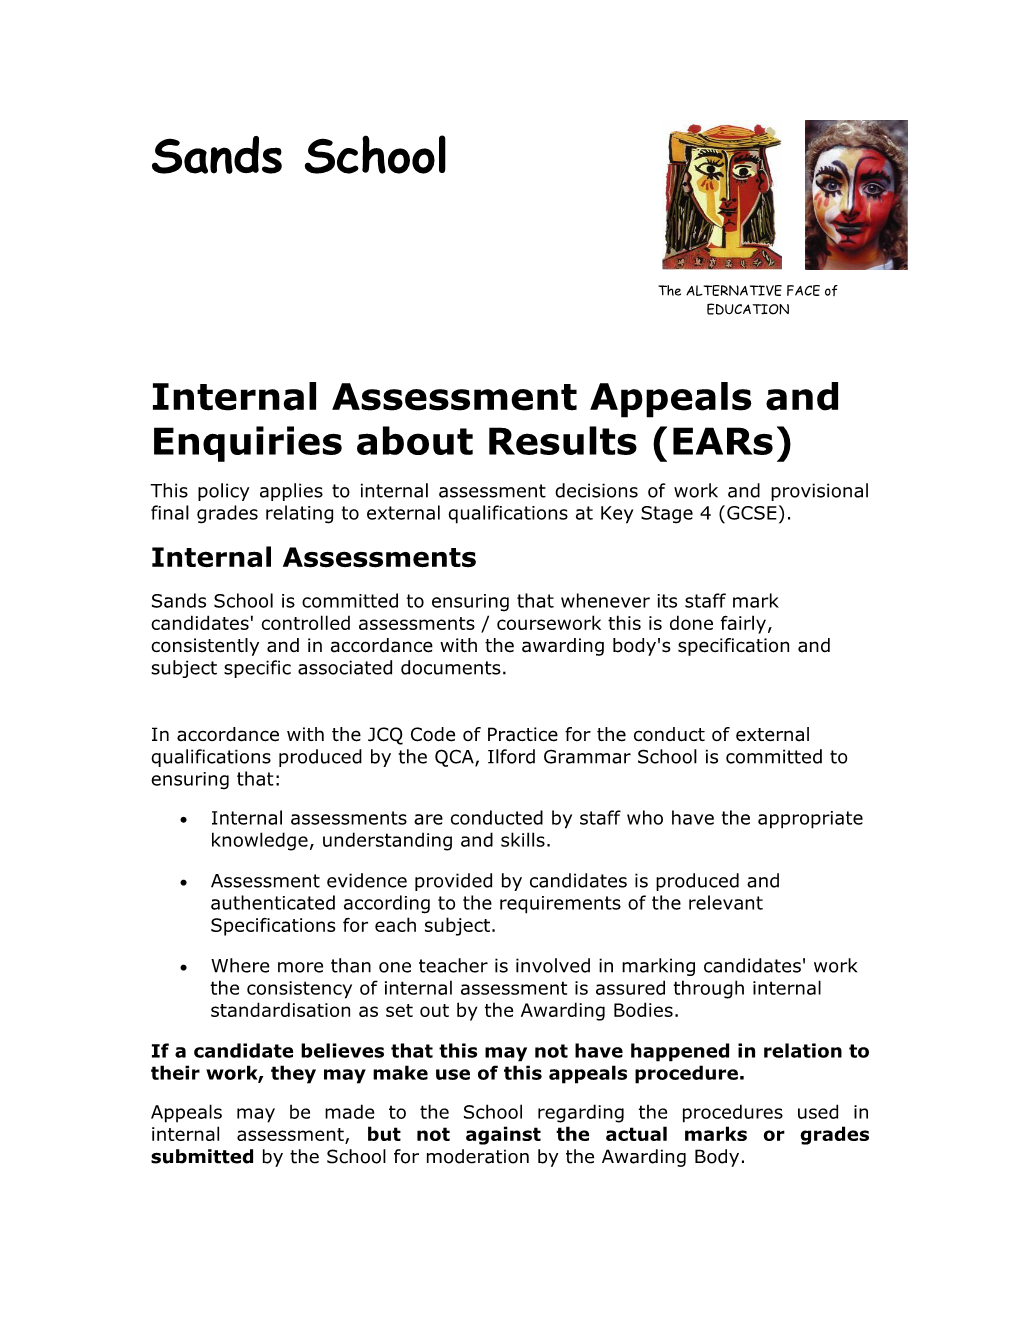 Internal Assessment Appeals and Enquiries About Results (Ears)